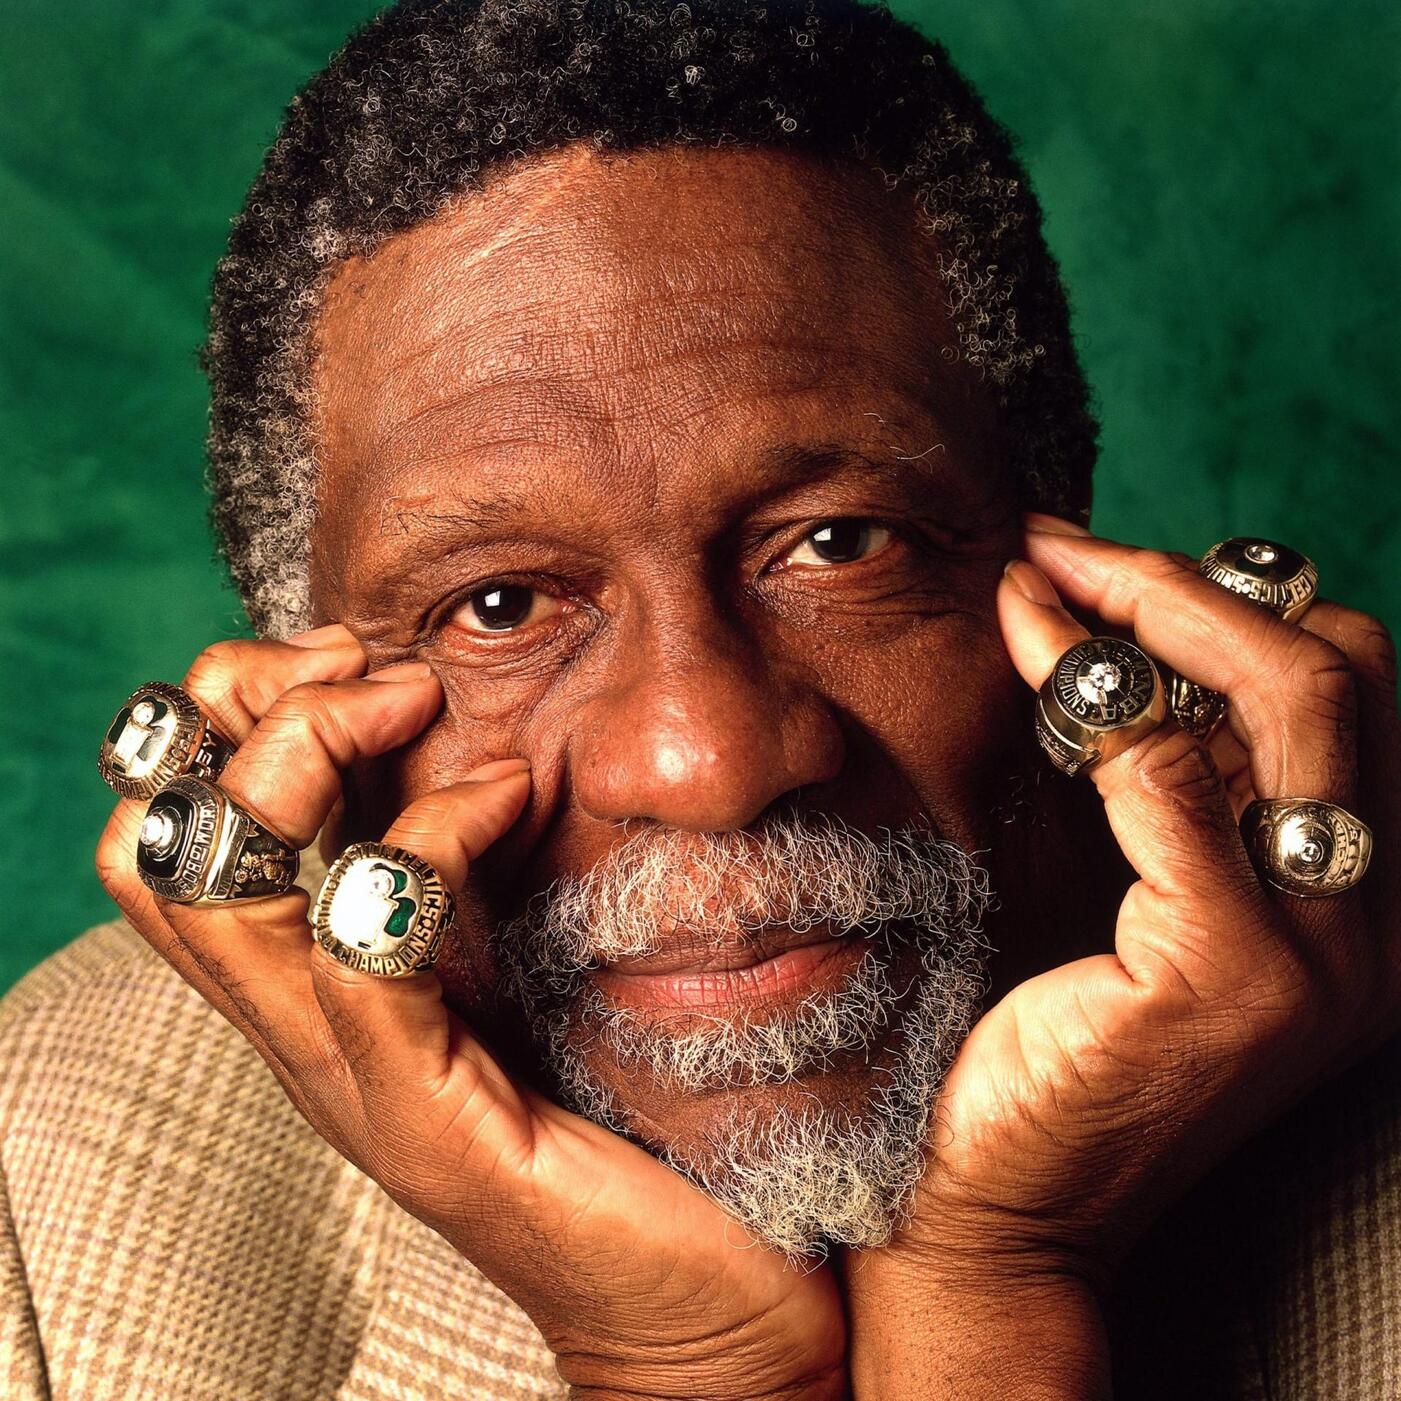 Volumes_Photos12_Other_History_6-Russell_Russell_Bill_Russell74072185-scaled.jpg